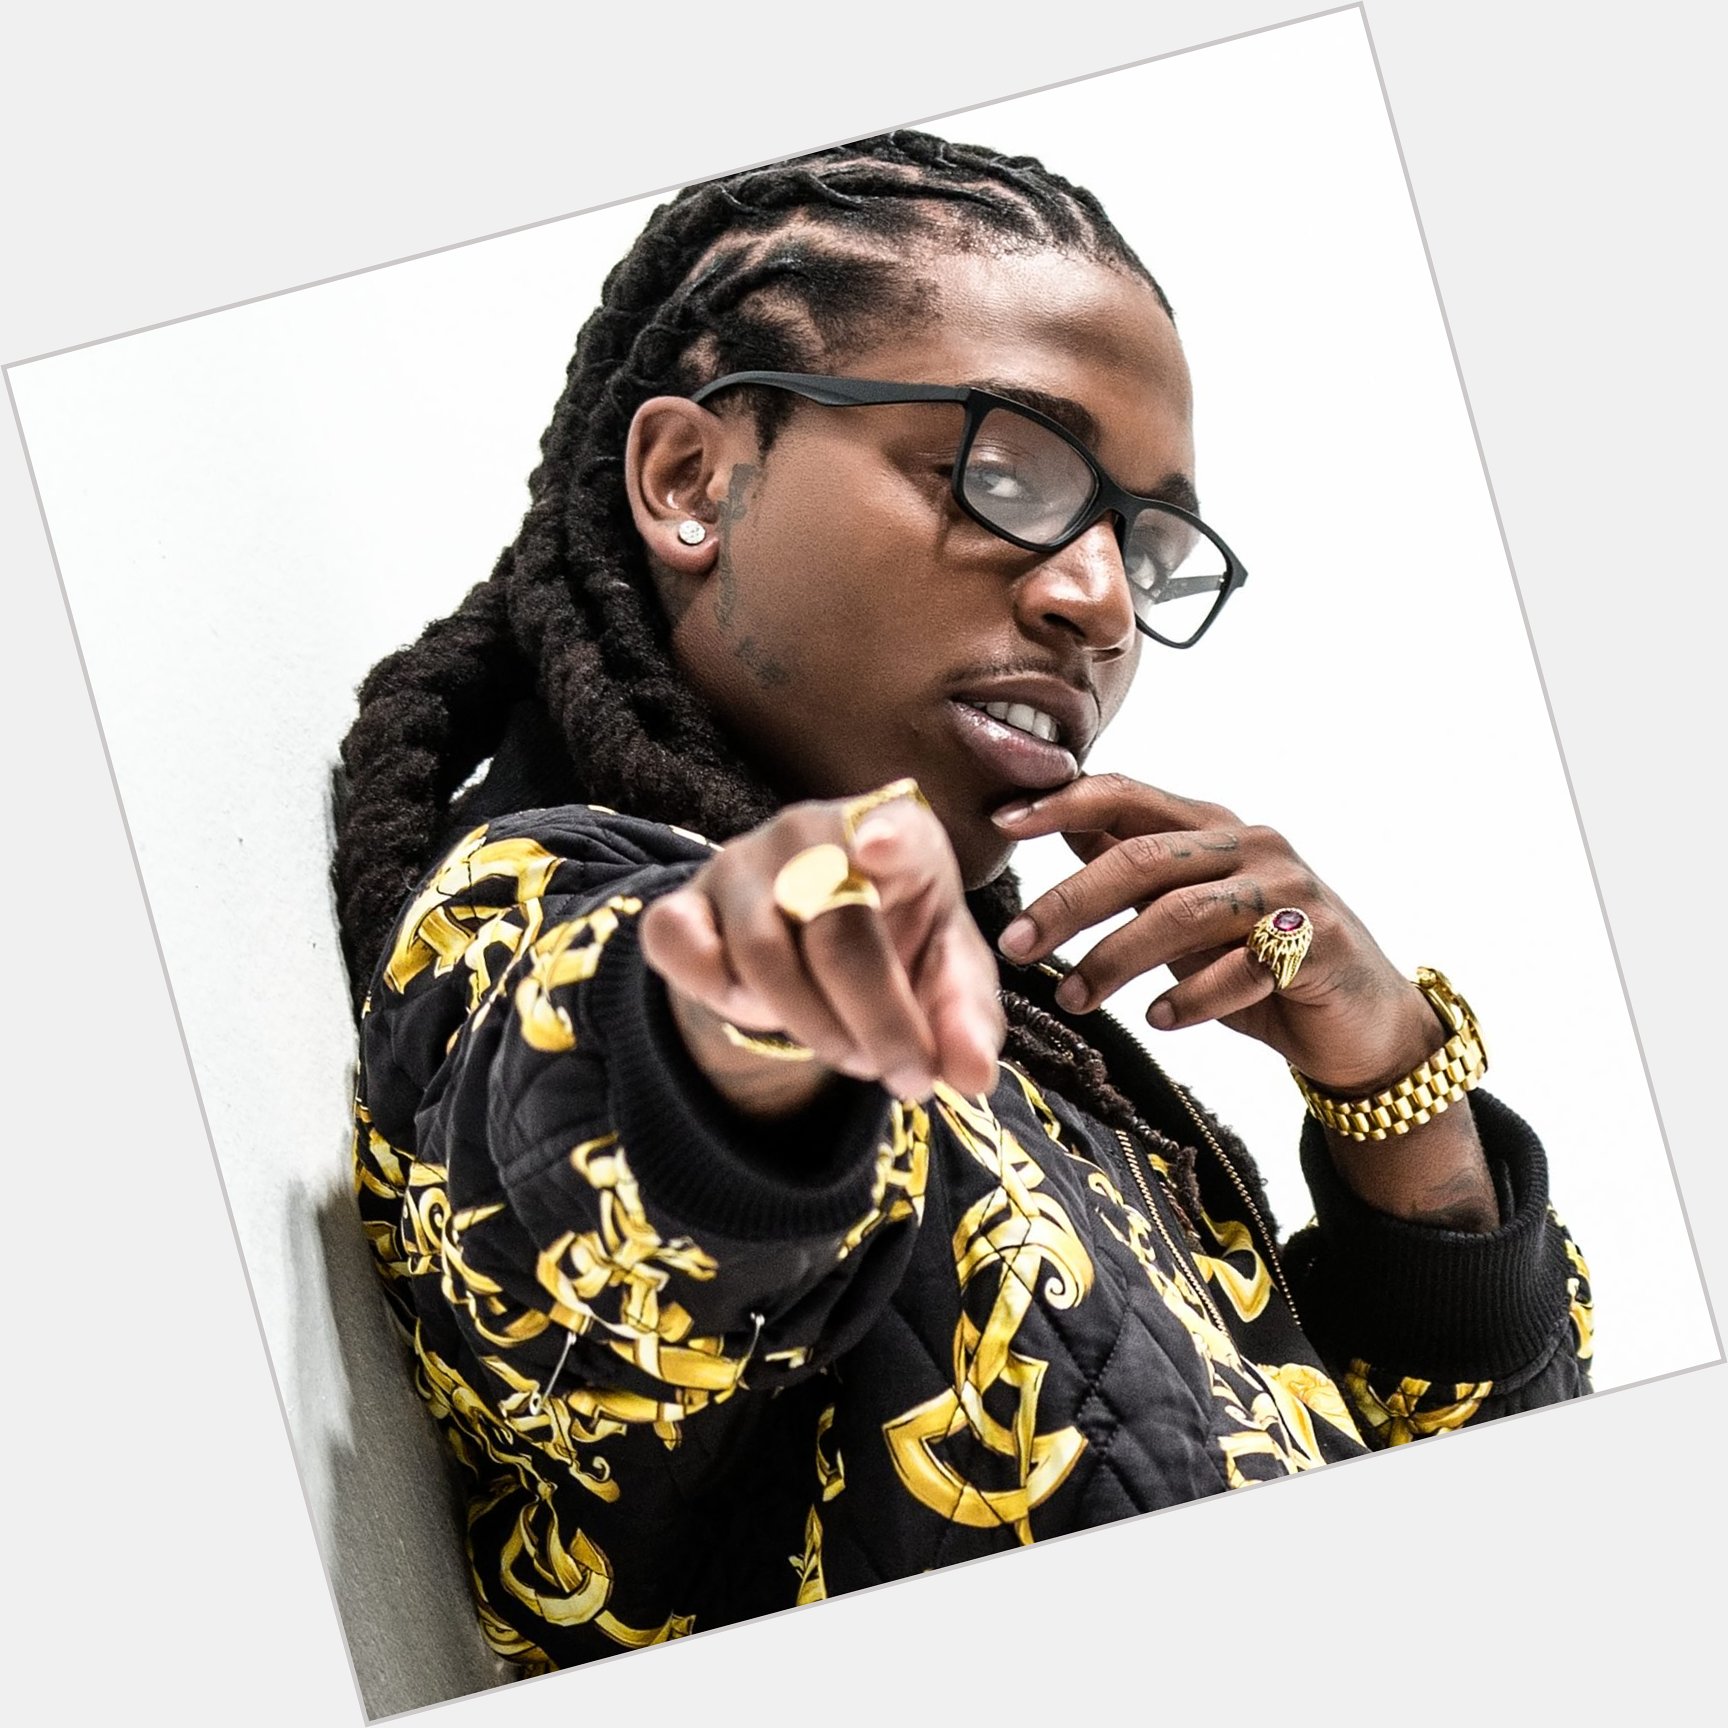 Https://fanpagepress.net/m/J/Jacquees New Pic 1